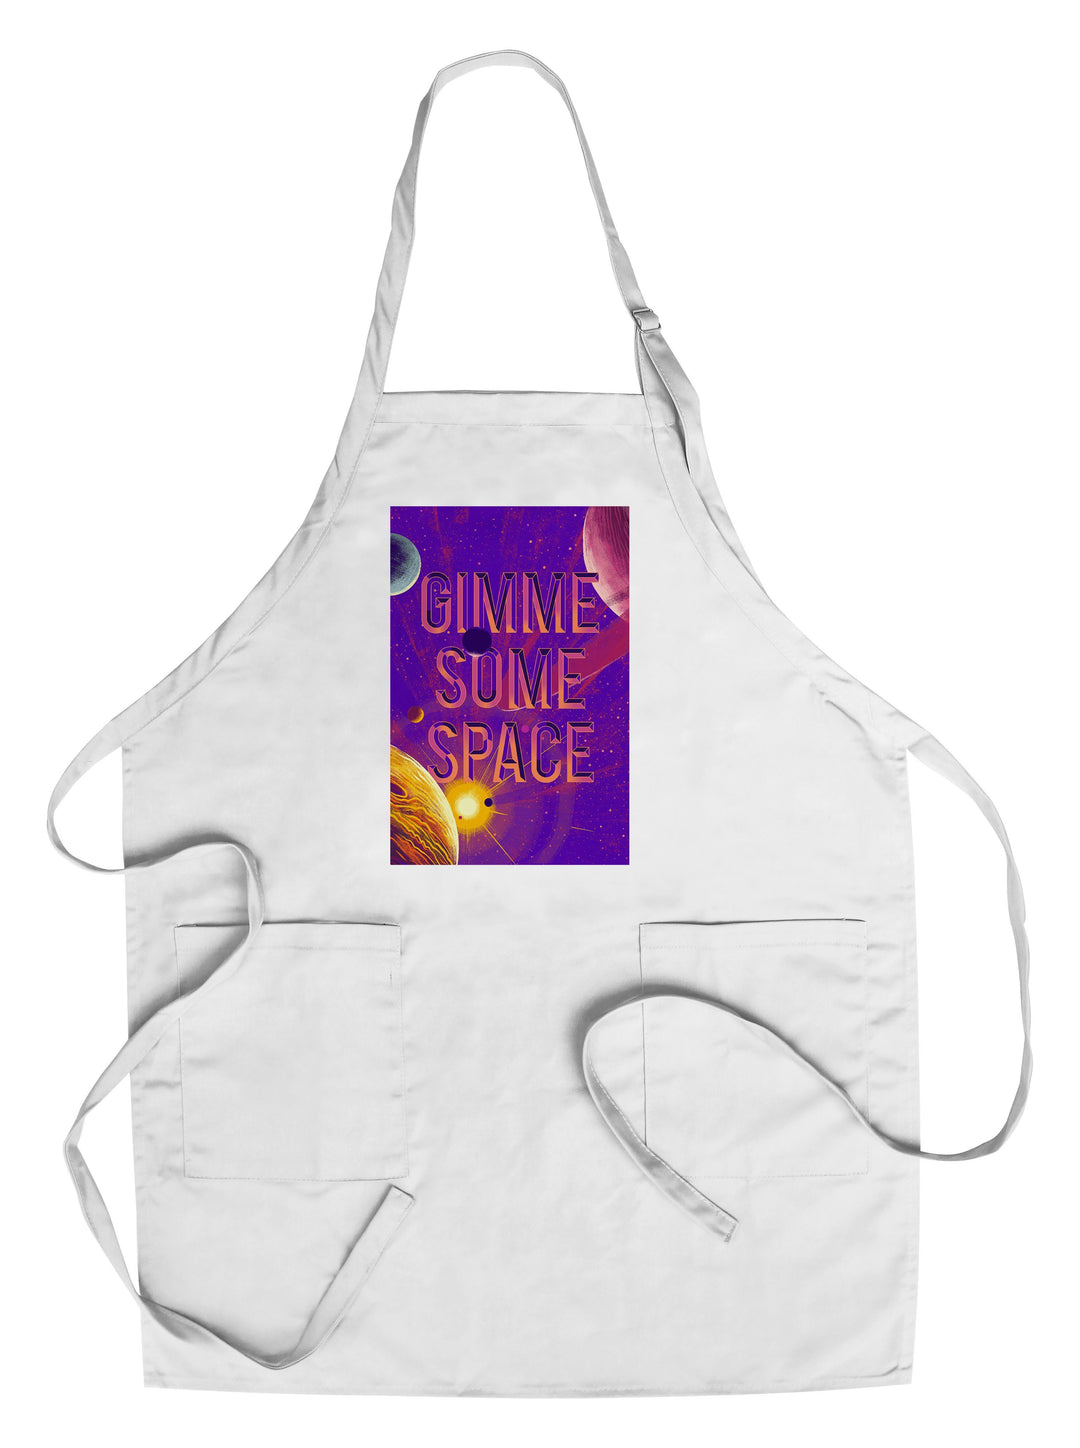 Because, Science Collection, Planets, Solar System, Gimme Some Space, Towels and Aprons Kitchen Lantern Press Chef's Apron 